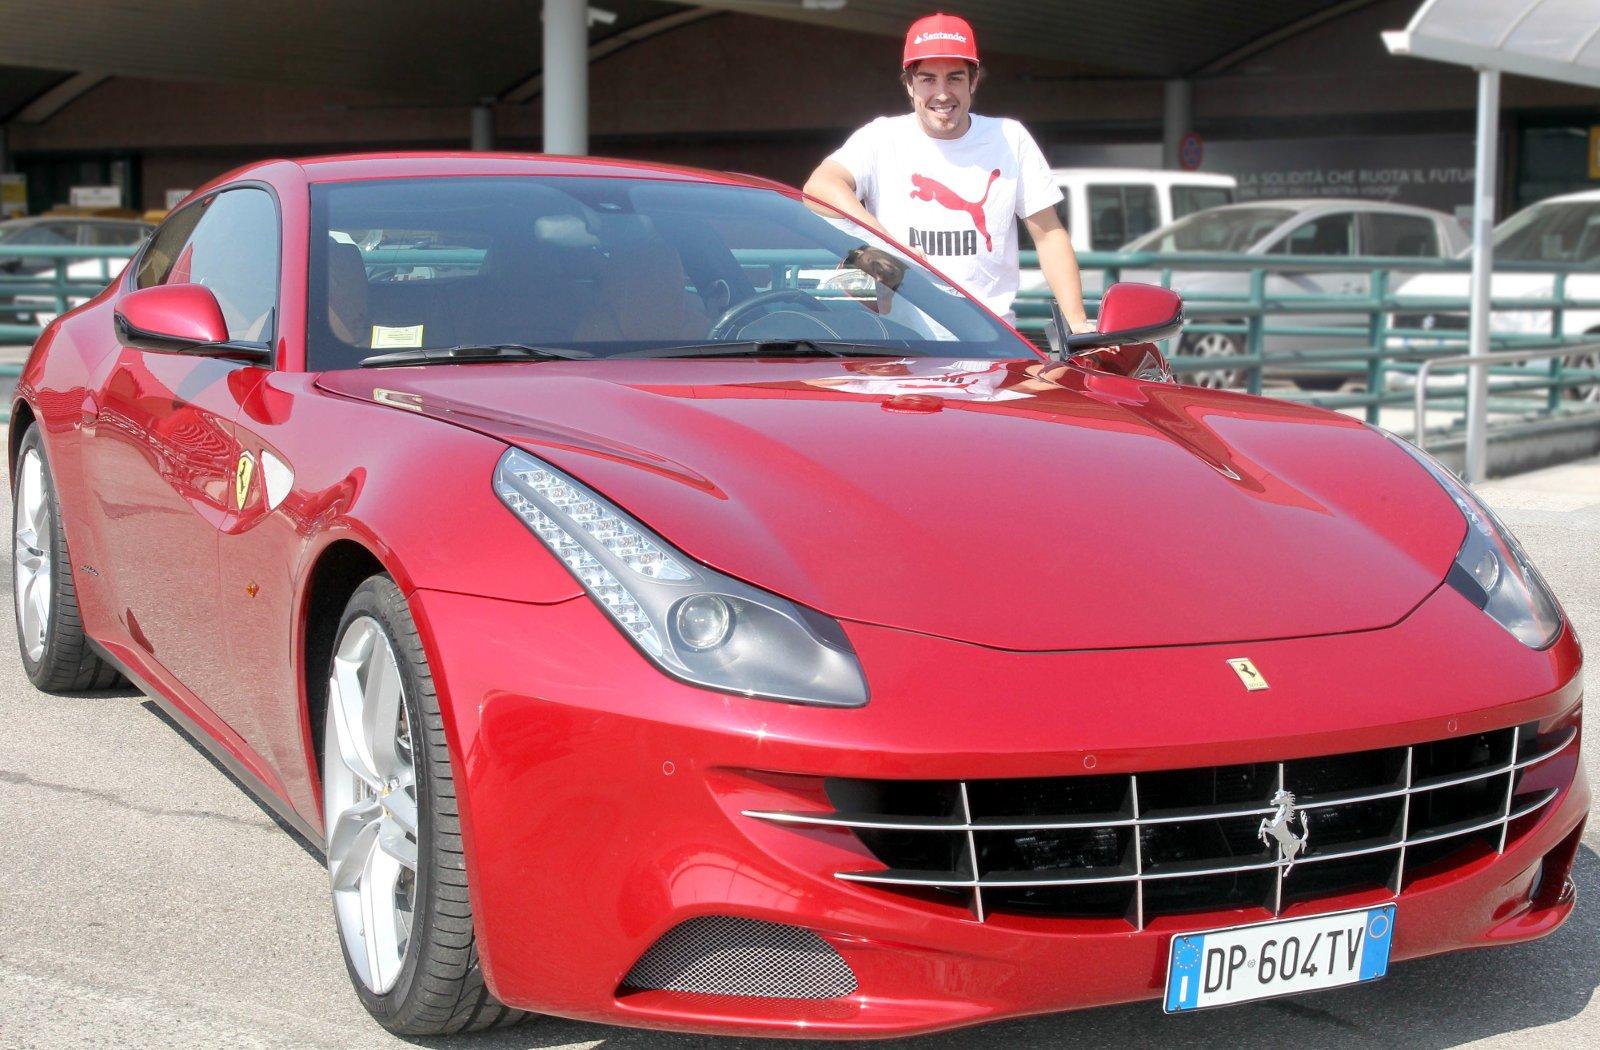 Ferrari FF gifted to Alonso